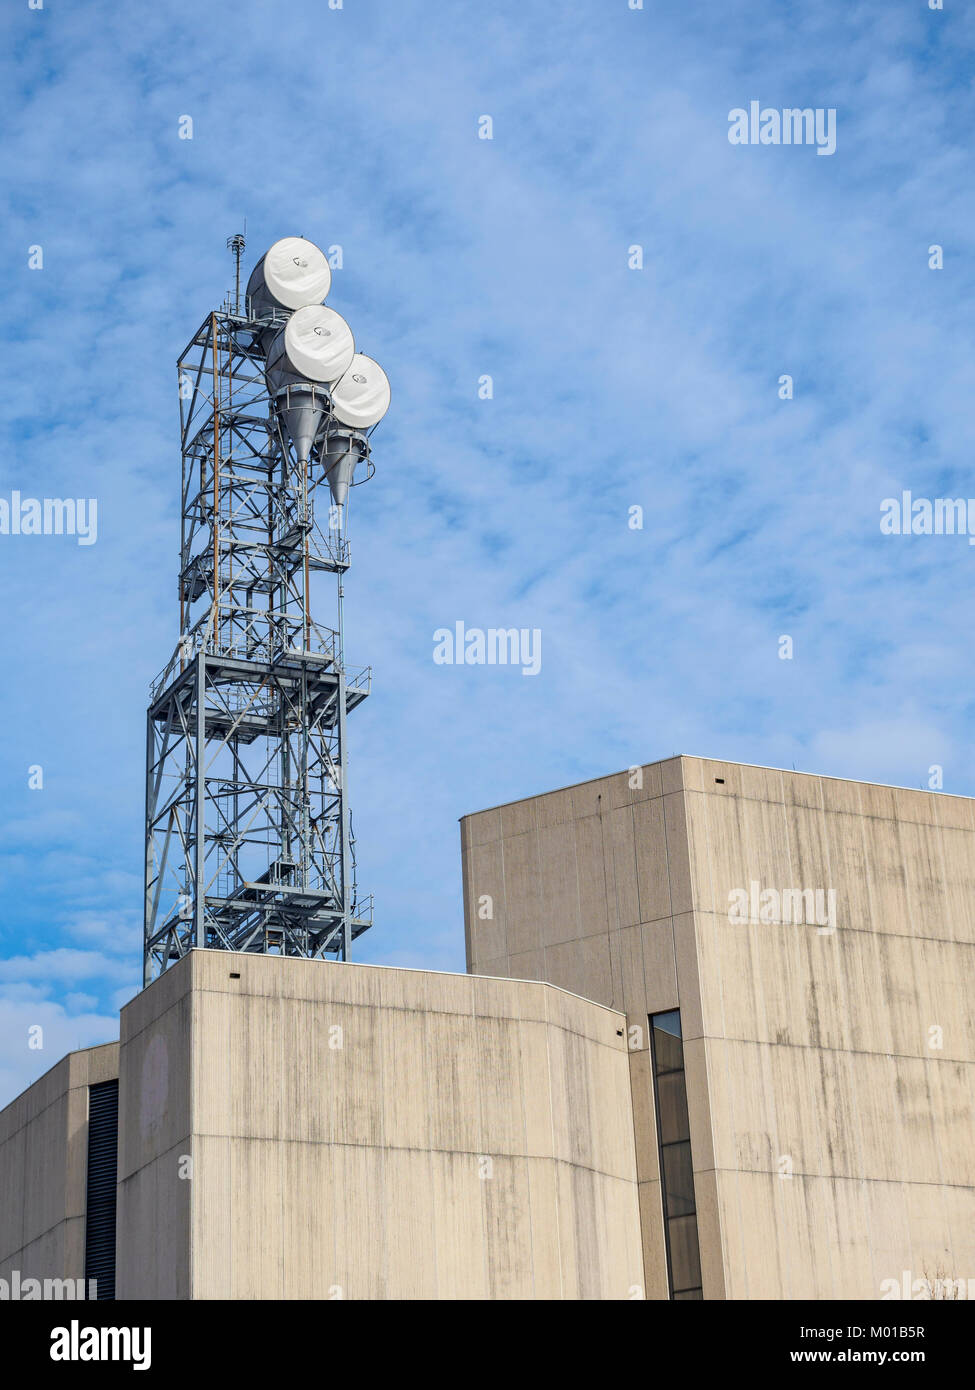 Microwave communication or telecommunications tower sitting atop a large concrete building or structure in Montgomery, Alabama USA. Stock Photo